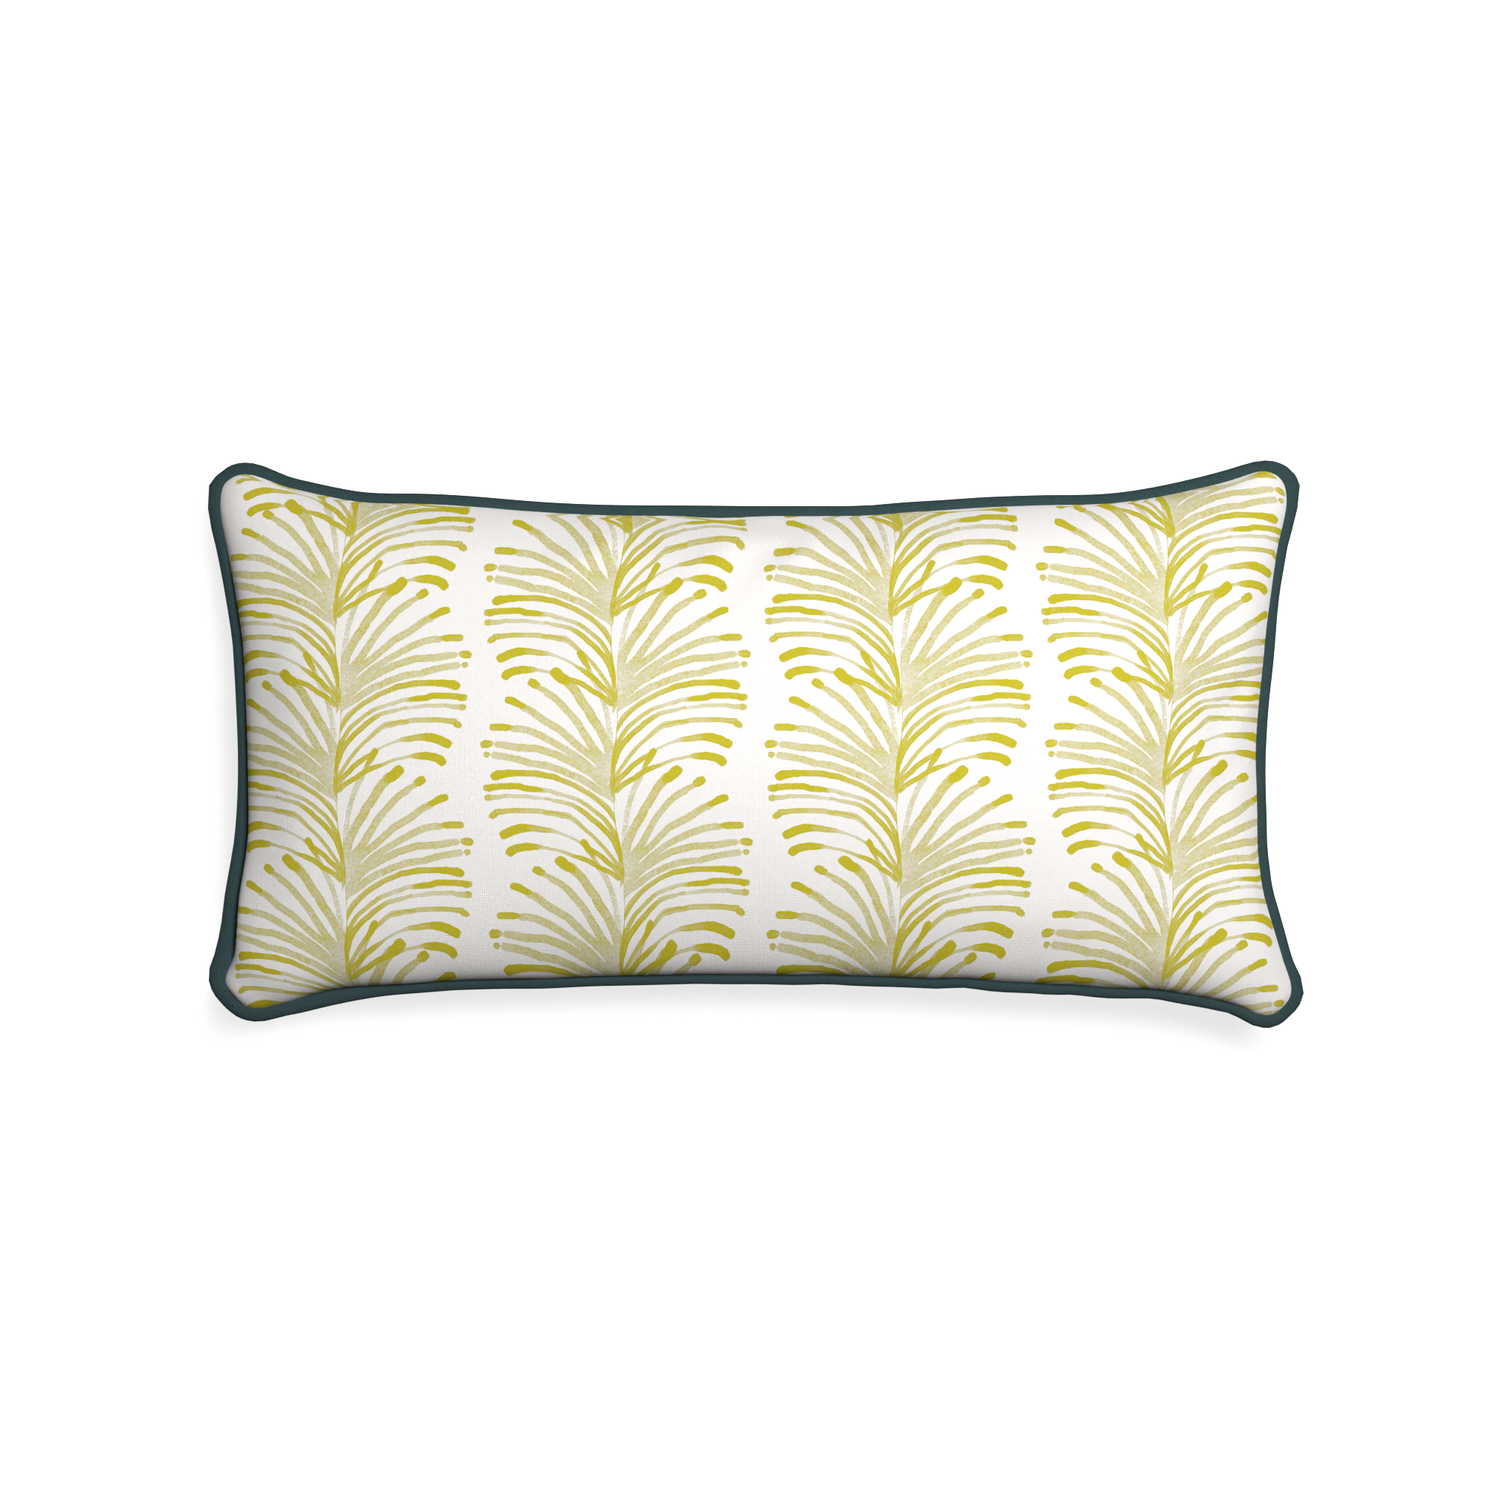 Midi-lumbar emma chartreuse custom yellow stripe chartreusepillow with p piping on white background